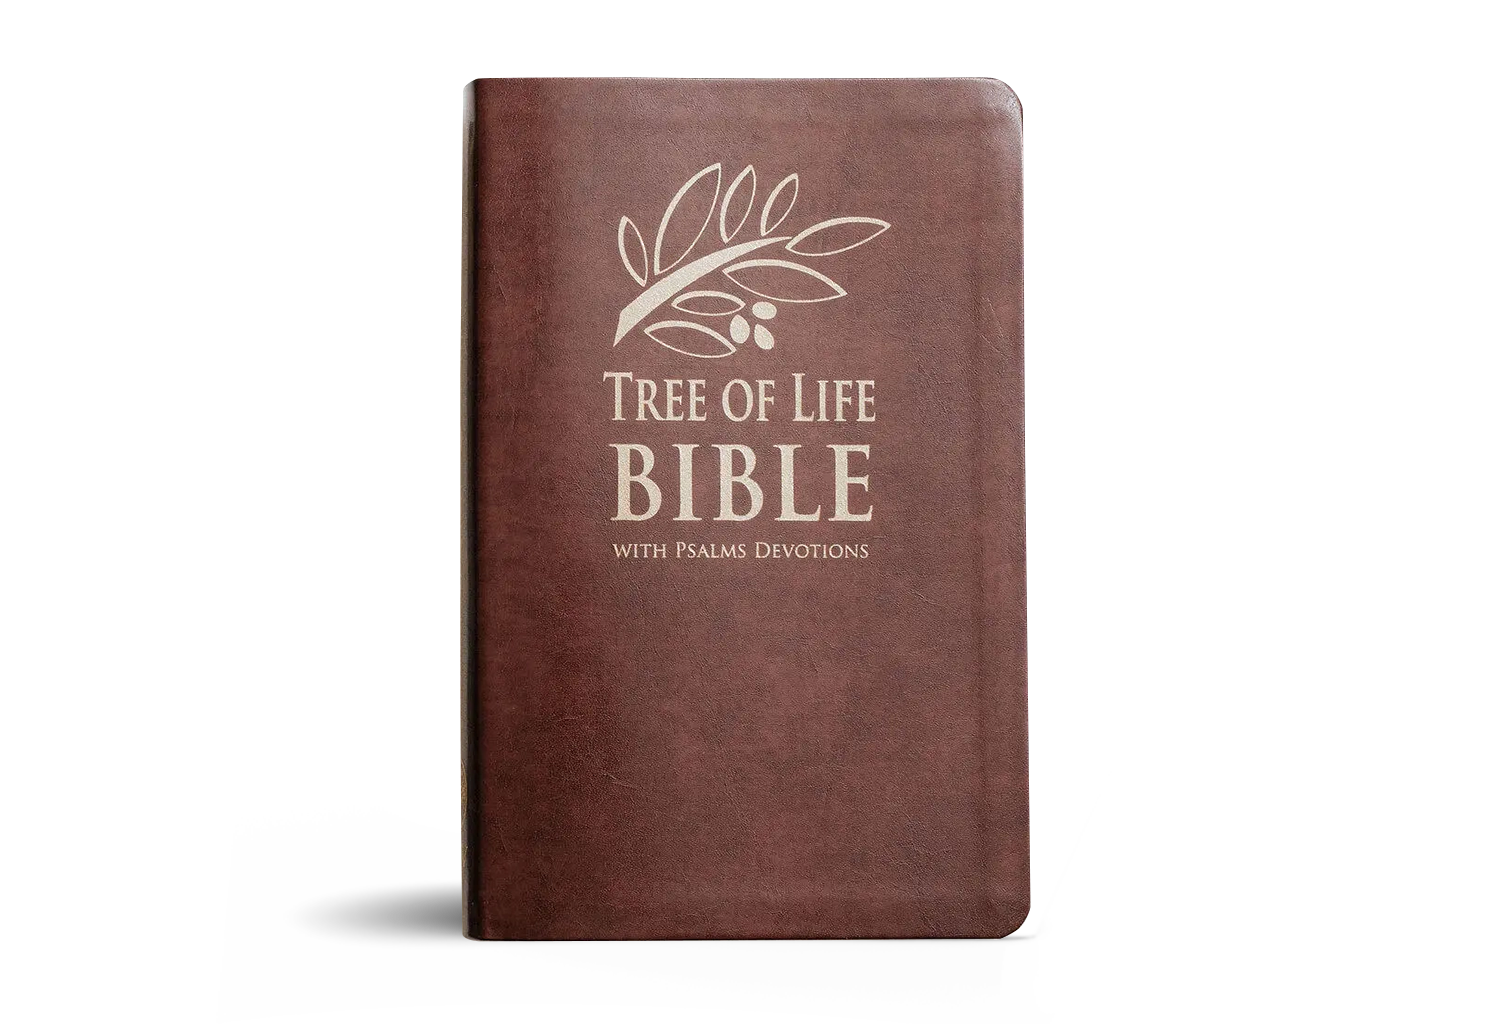 Tree of Life Bible by Daniah Greenberg from TBN